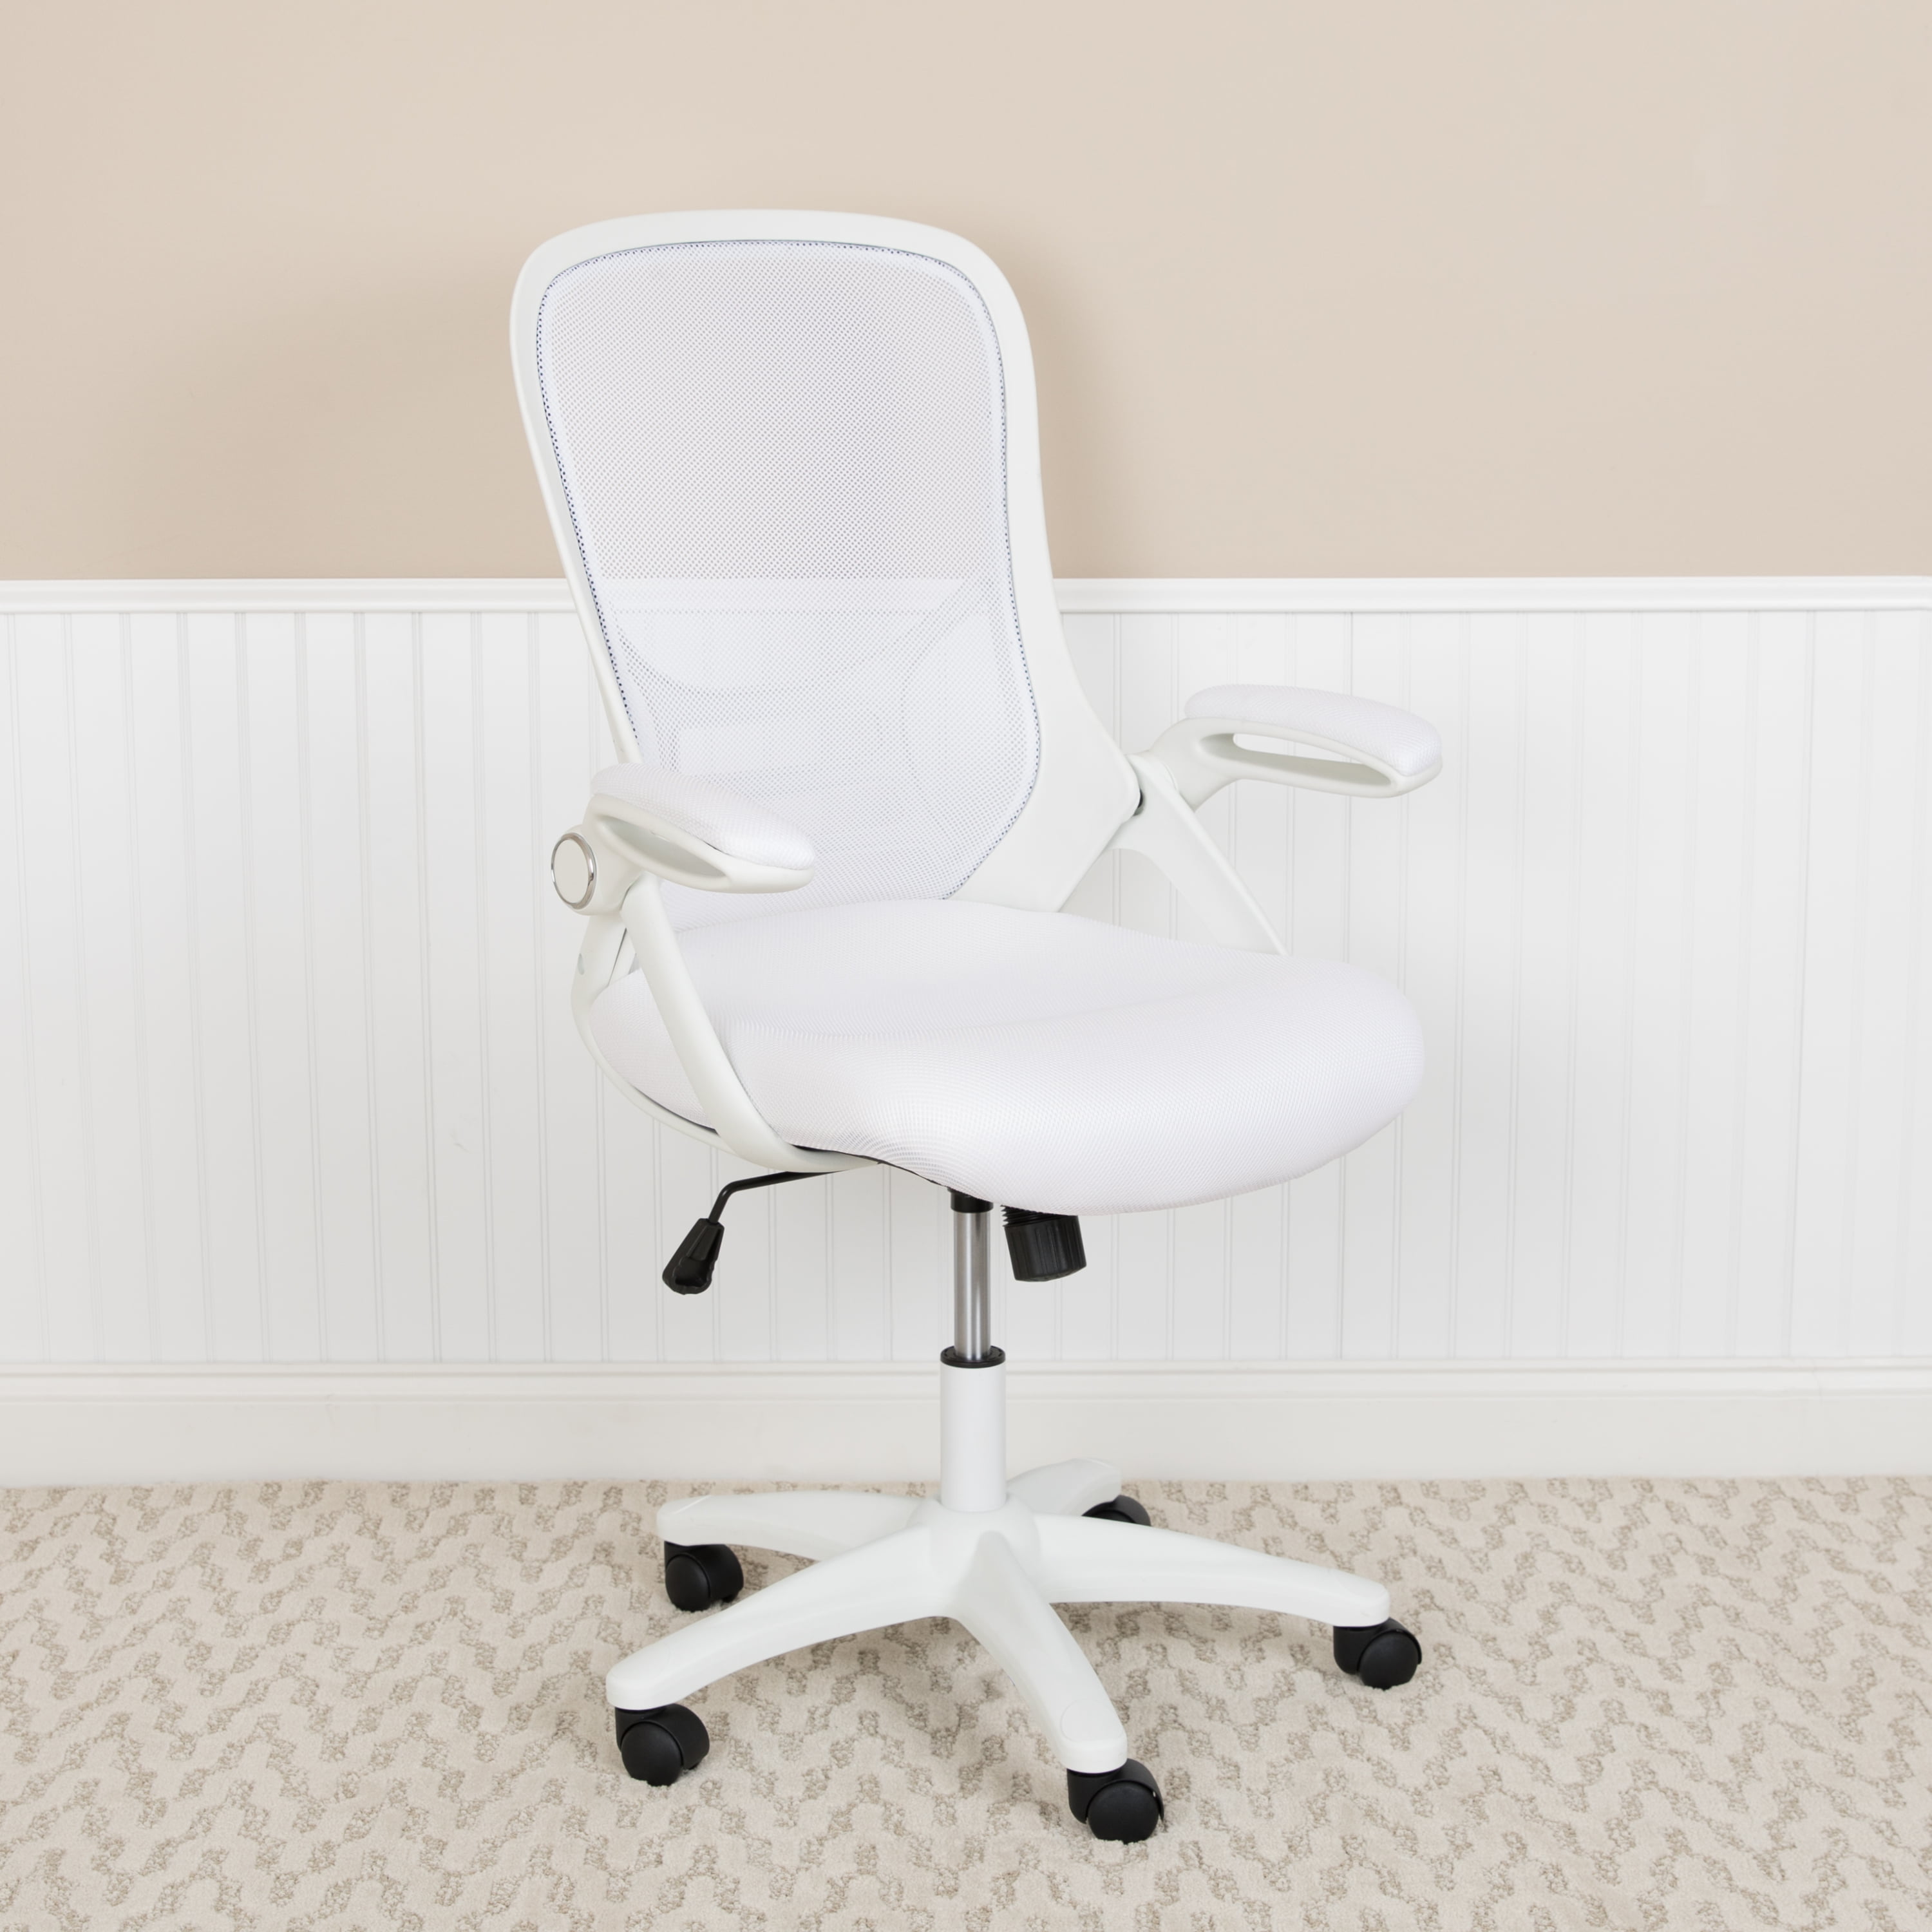 High-Back Office Chair in White - Walmart.com